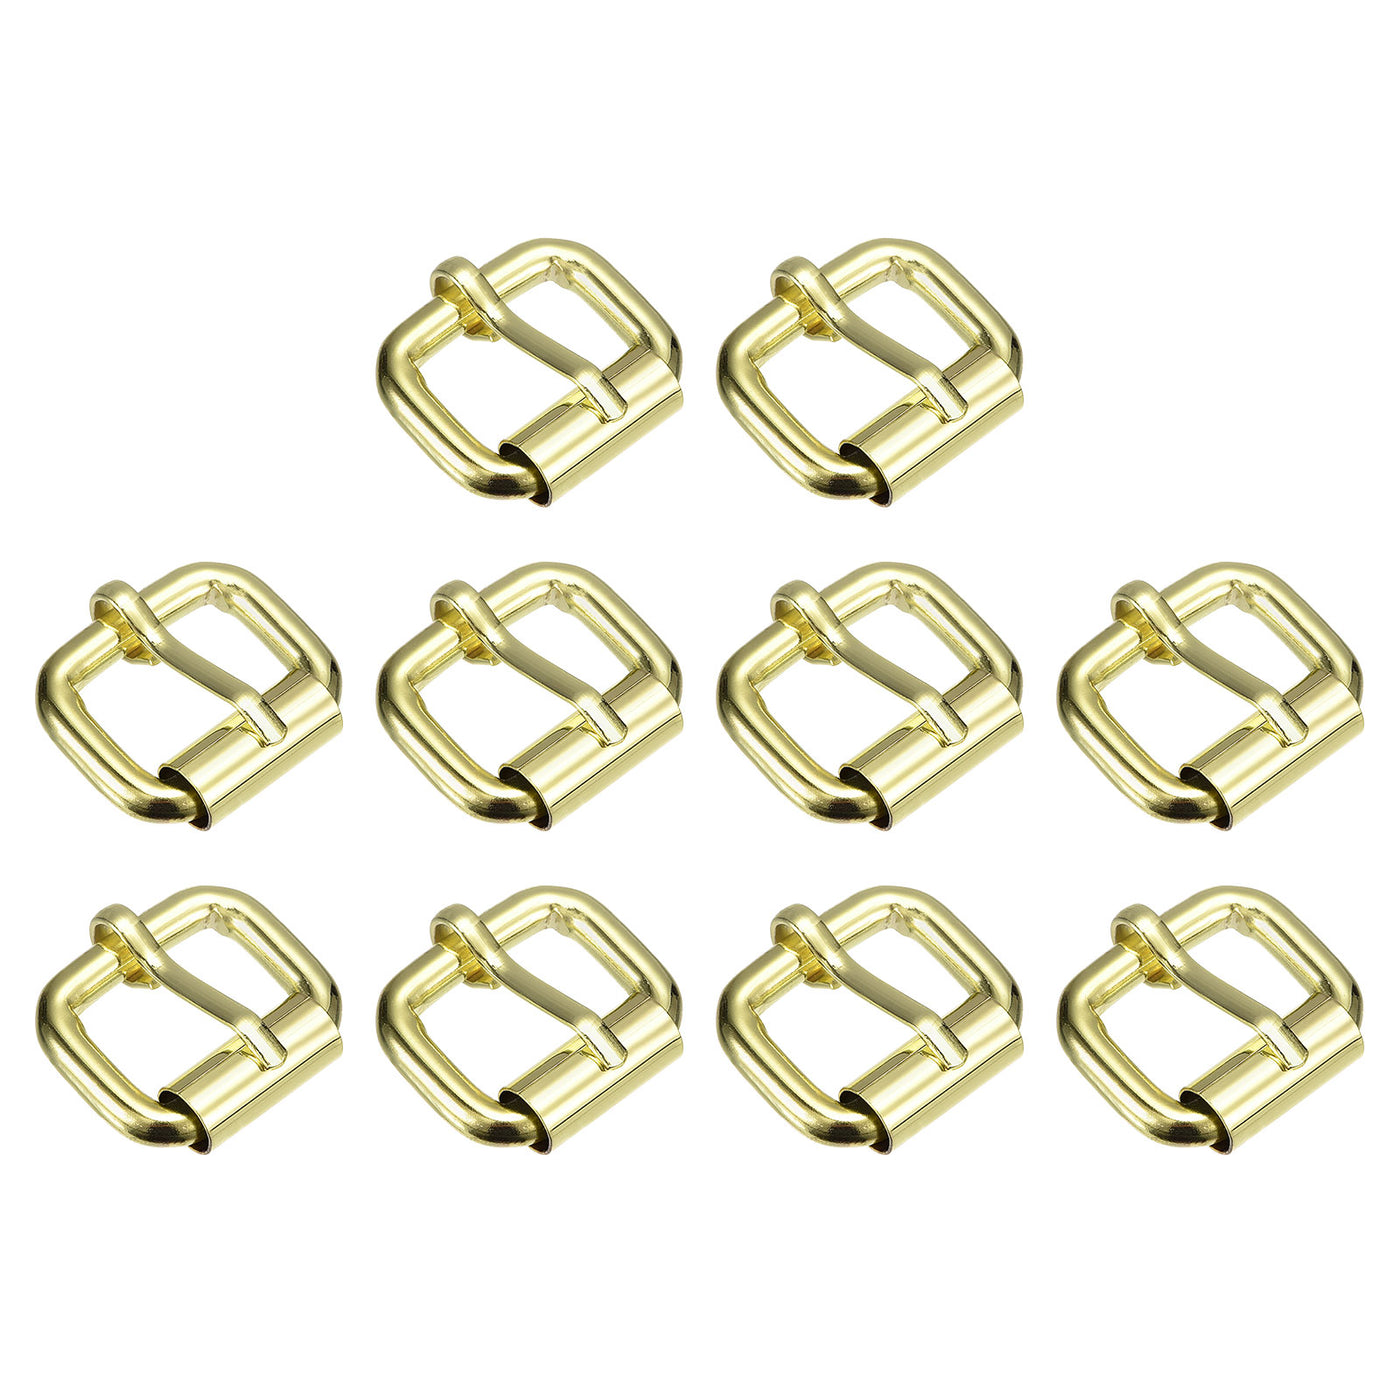 uxcell Uxcell Roller Buckles, 25pcs 20x15mm 4.8mm Thick Metal Belt Pin Buckle, Bronze Tone